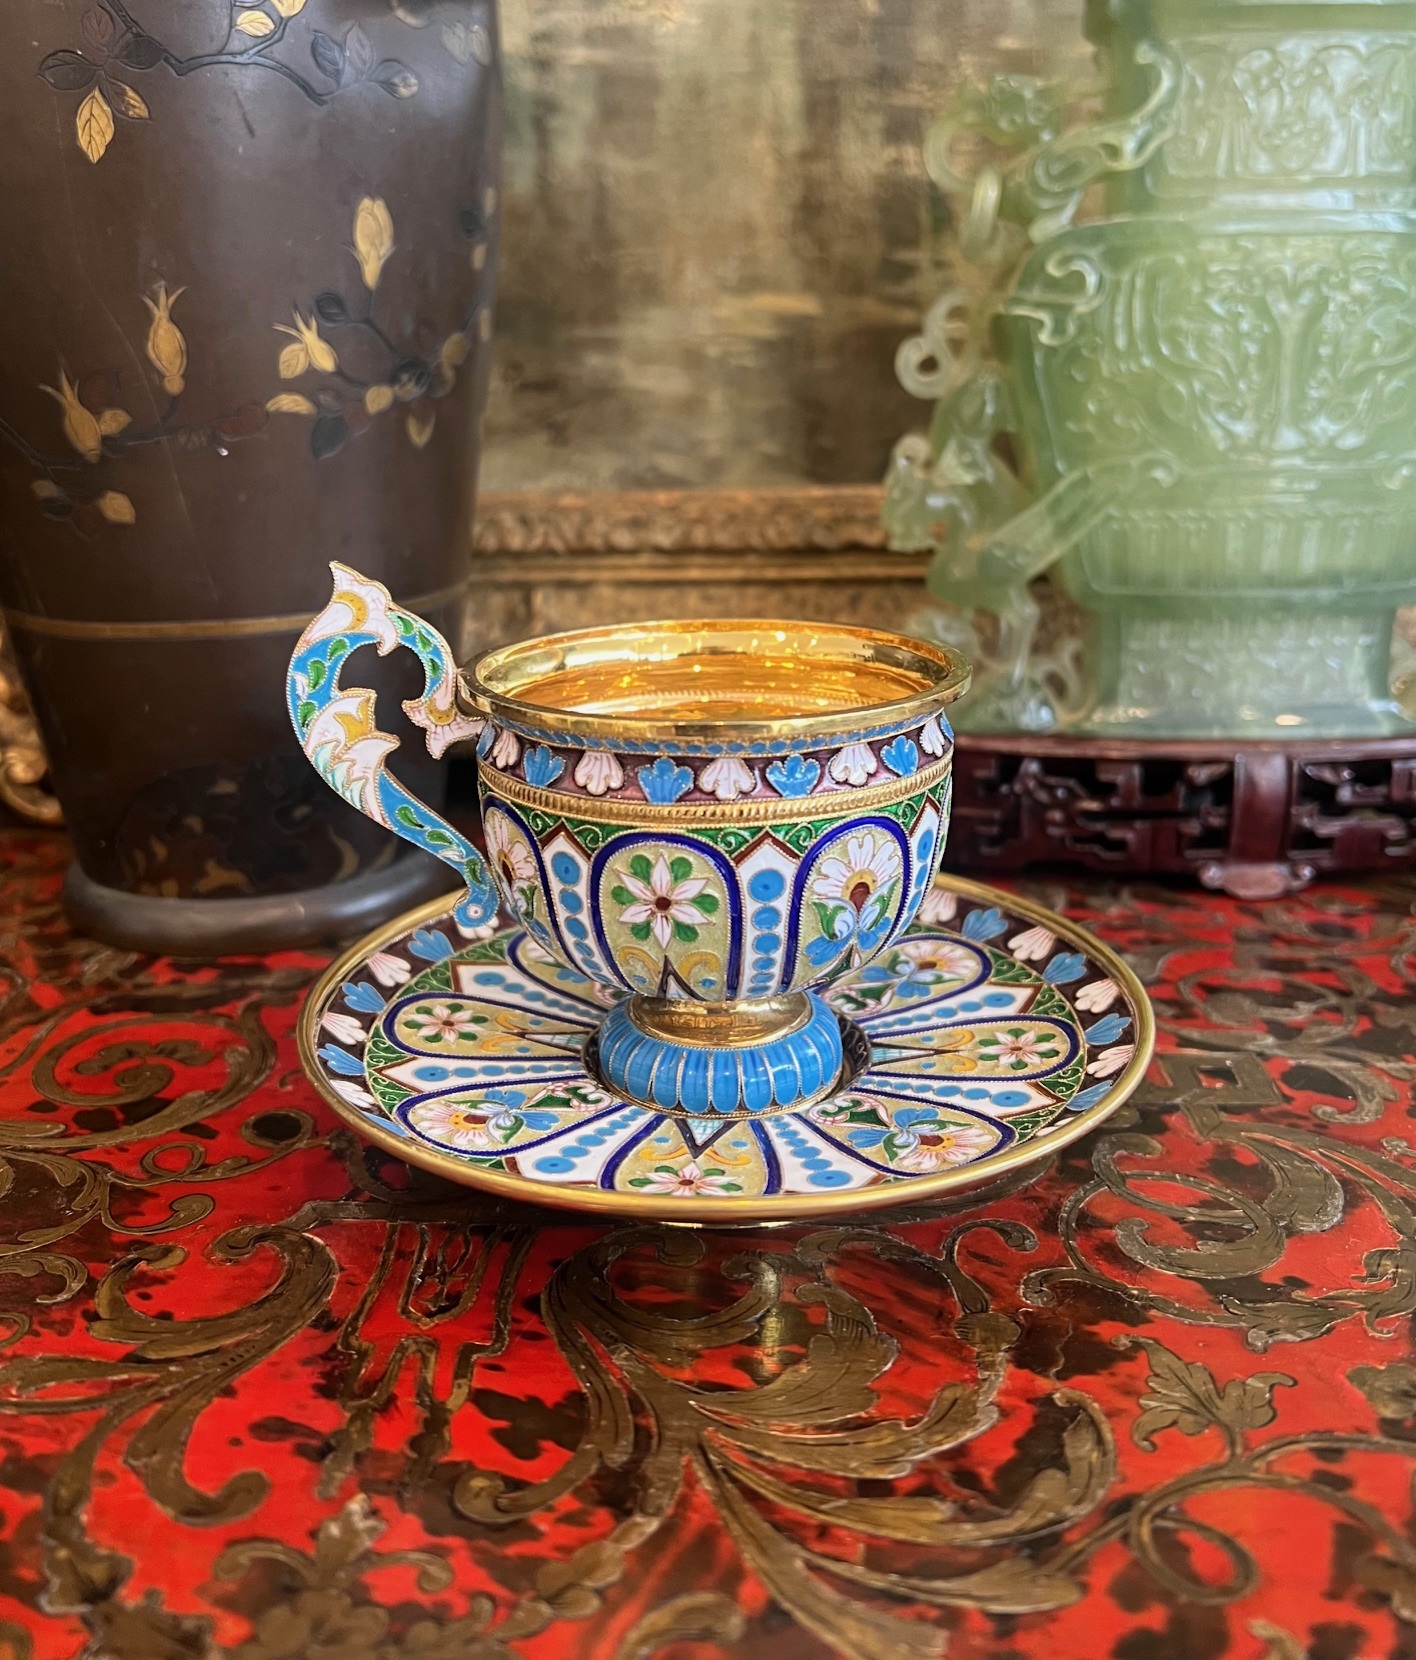 A SOLID SILVER GILT AND ENAMEL CUP AND SAUCER IN THE MANNER OF OVCHINNIKOV